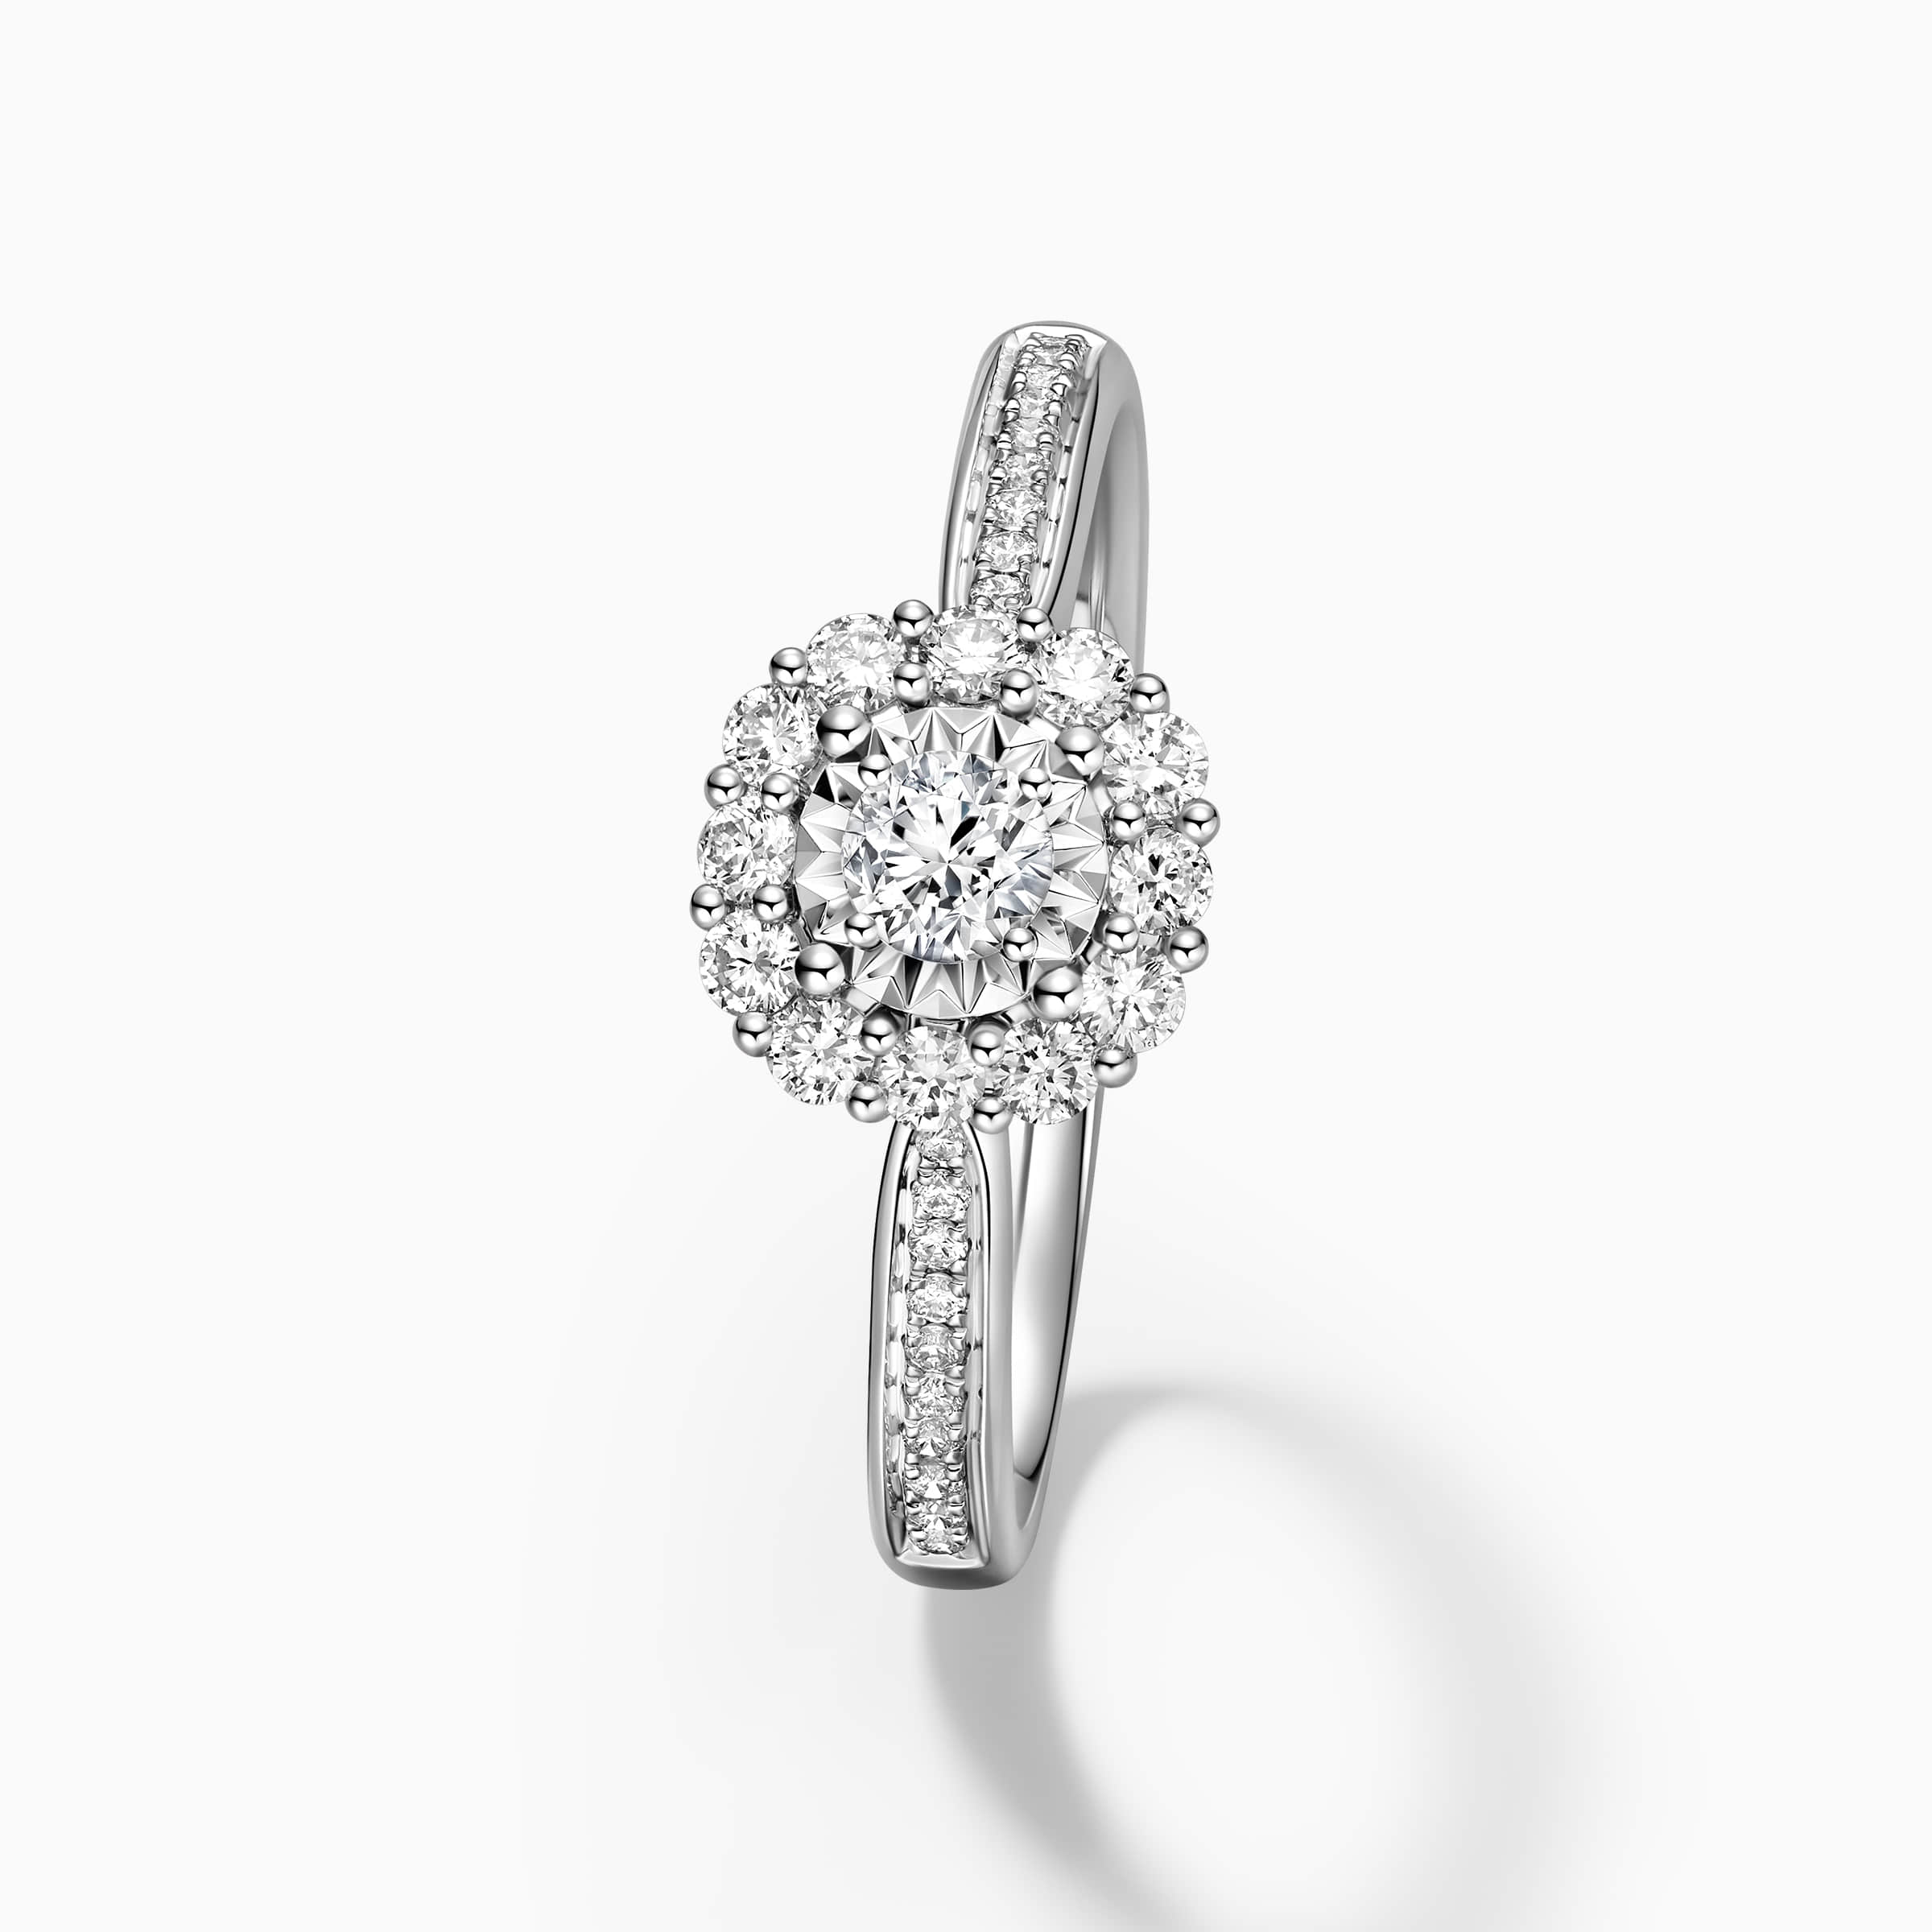 Darry Ring diamond halo promise ring top view